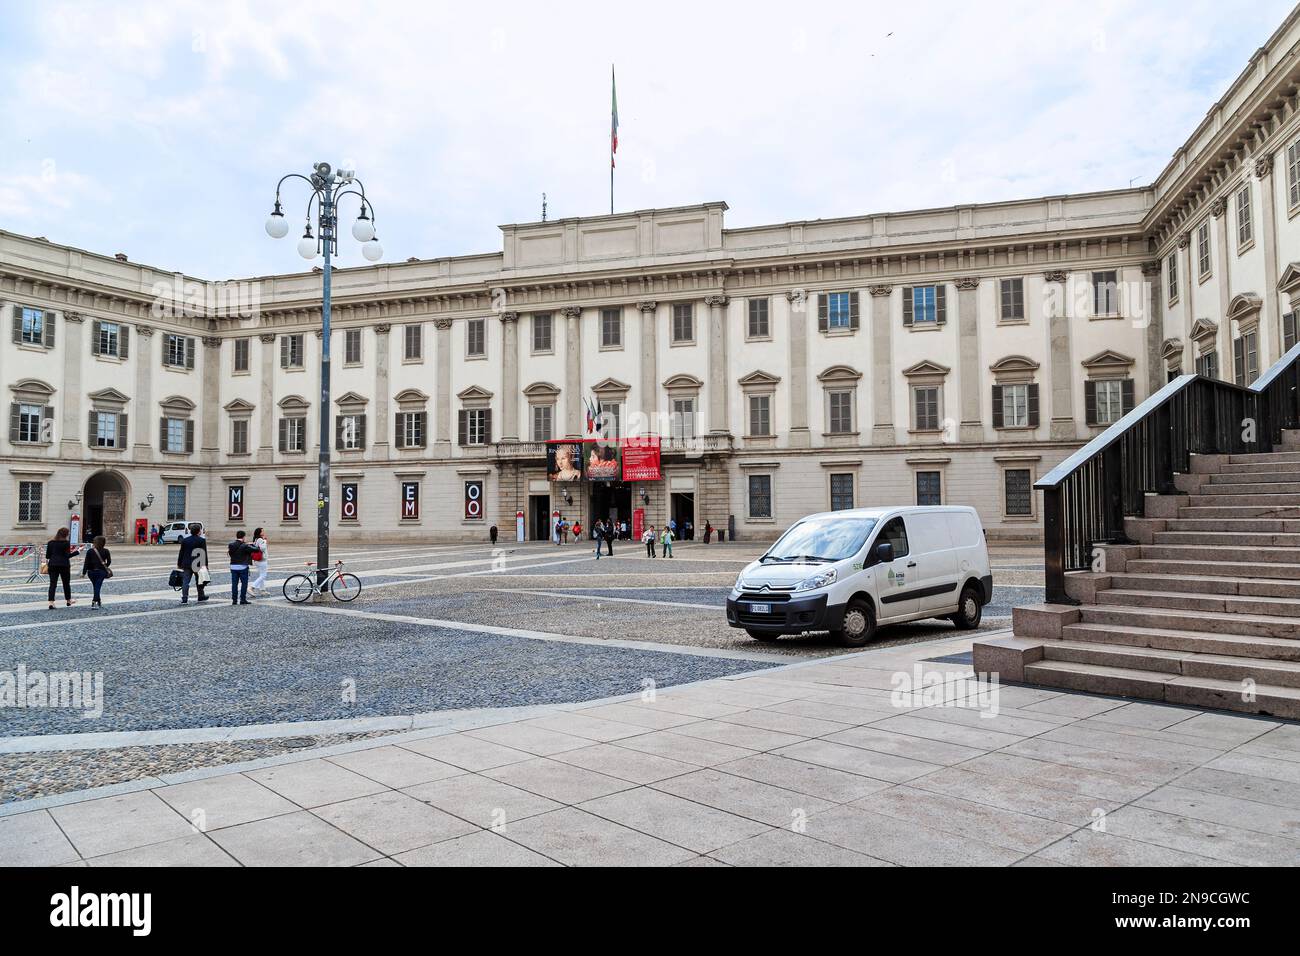 MILAN, ITALY - MAY 19, 2018: This is building of the Royal Palace, which currently houses the Museum of the Cathedral. Stock Photo